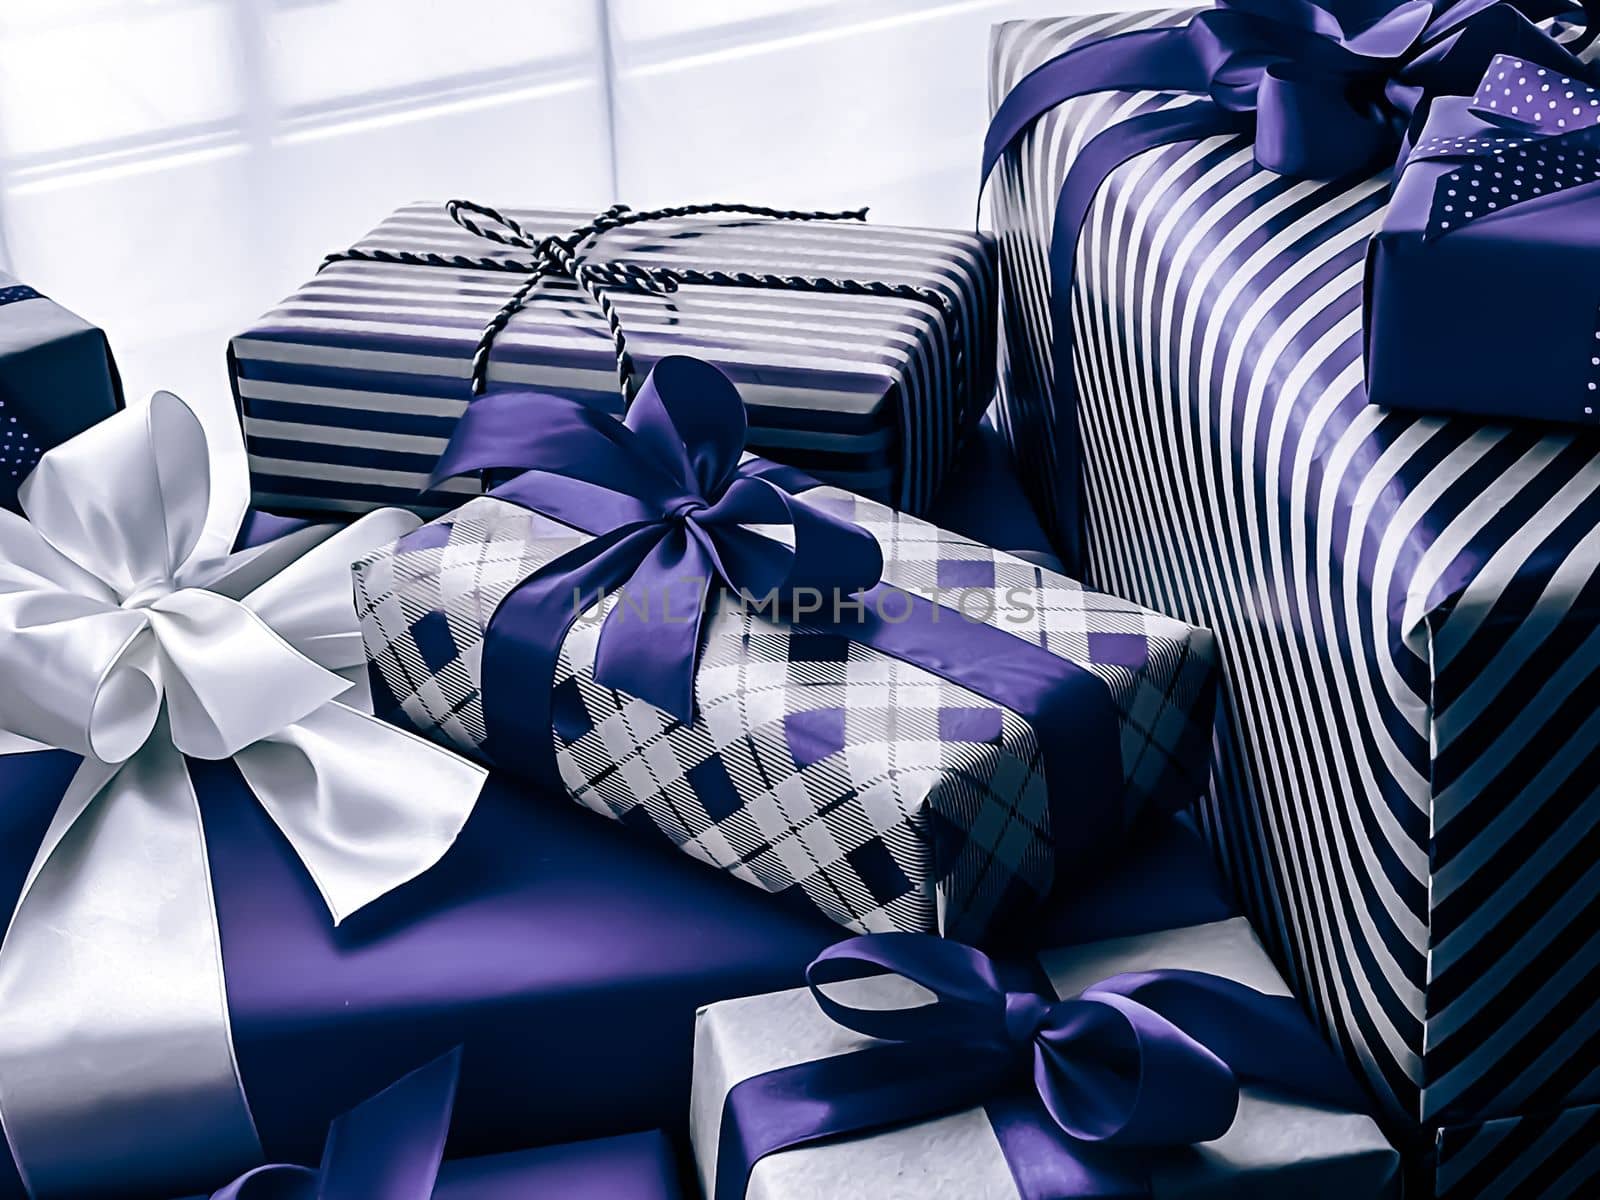 Holiday gifts and wrapped luxury presents, purple gift boxes as surprise present for birthday, Christmas, New Year, Valentines Day, boxing day, wedding and holidays shopping or beauty box delivery concept